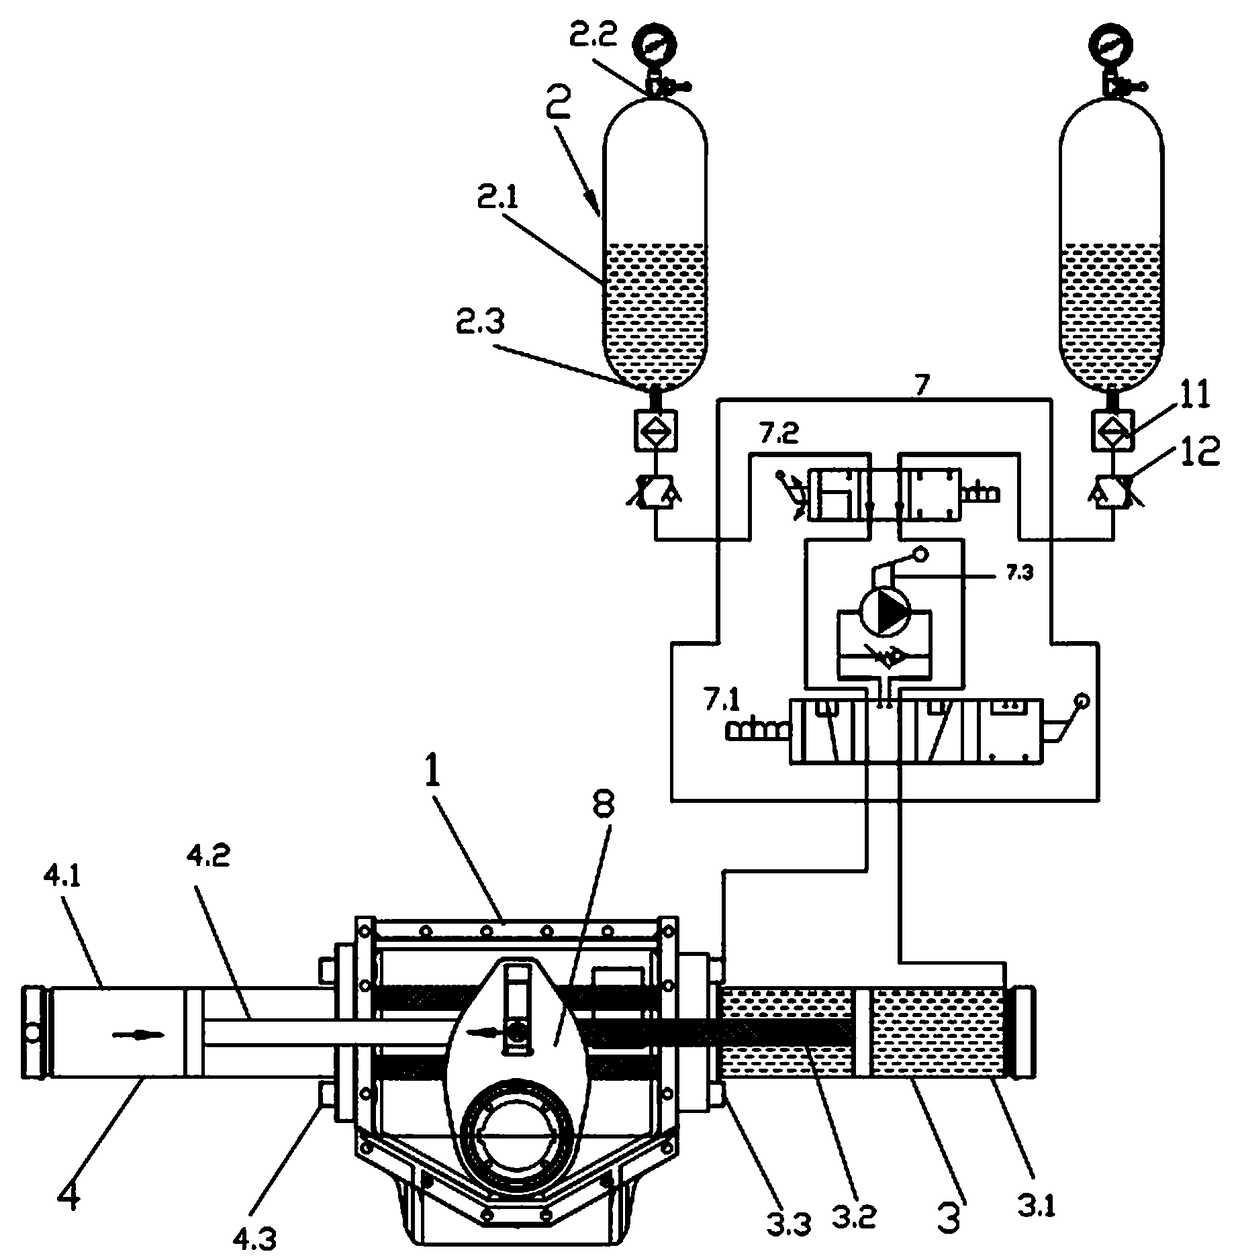 Miniaturized pneumatic-hydraulic linkage actuator for large-diameter valve and low air source